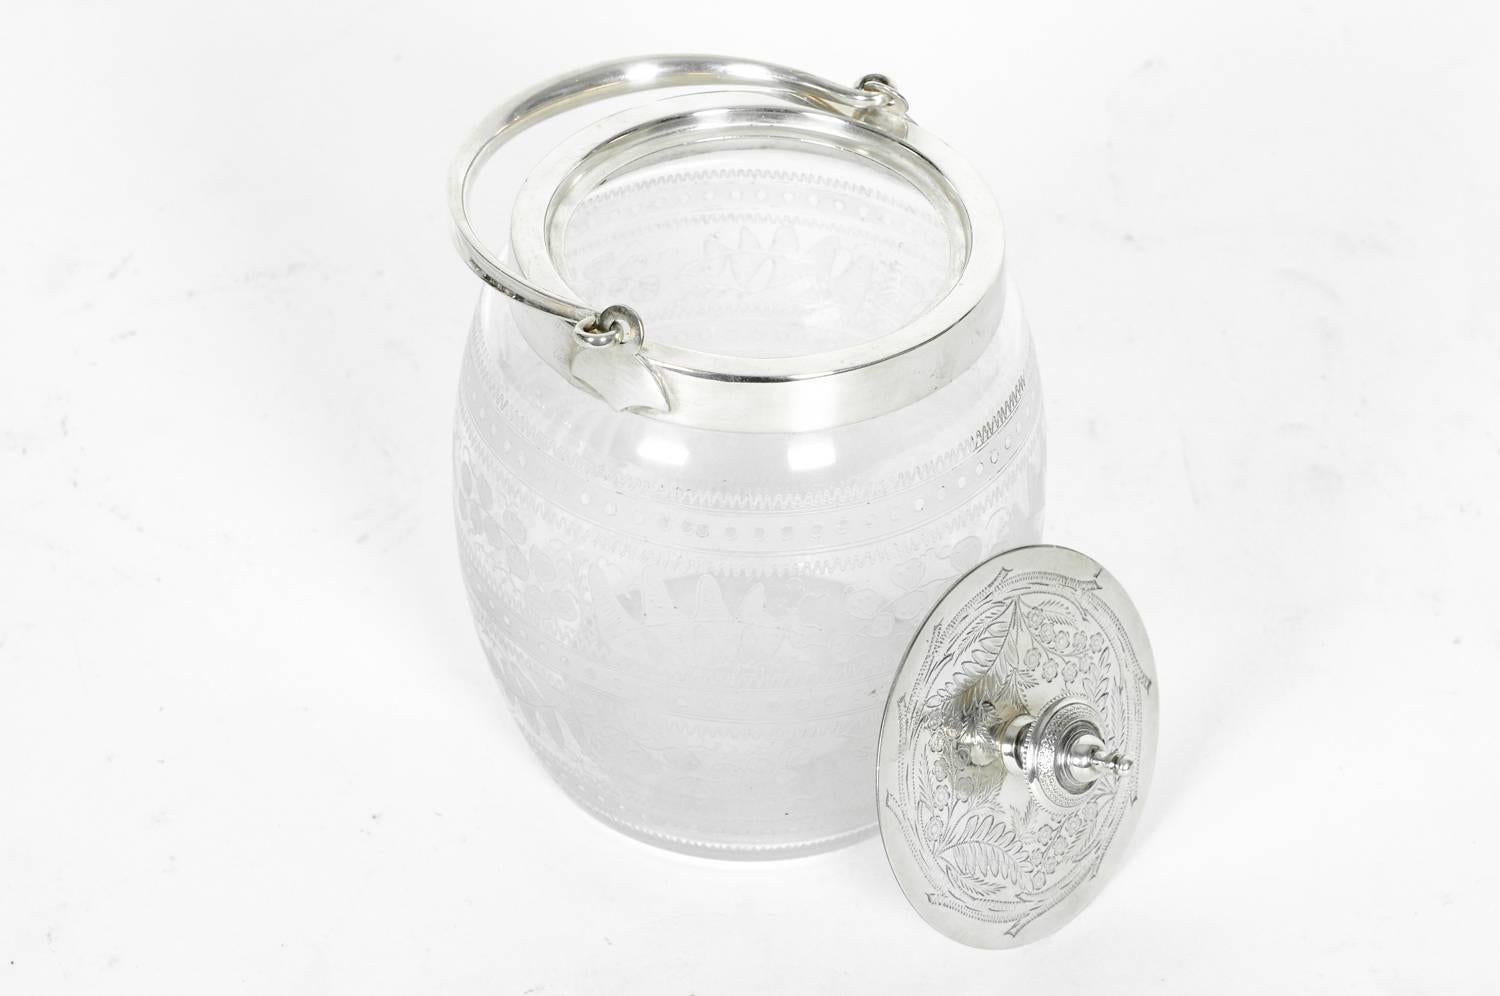 Great Britain (UK) Old English Silver Plate Covered Cut Glass Ice Bucket